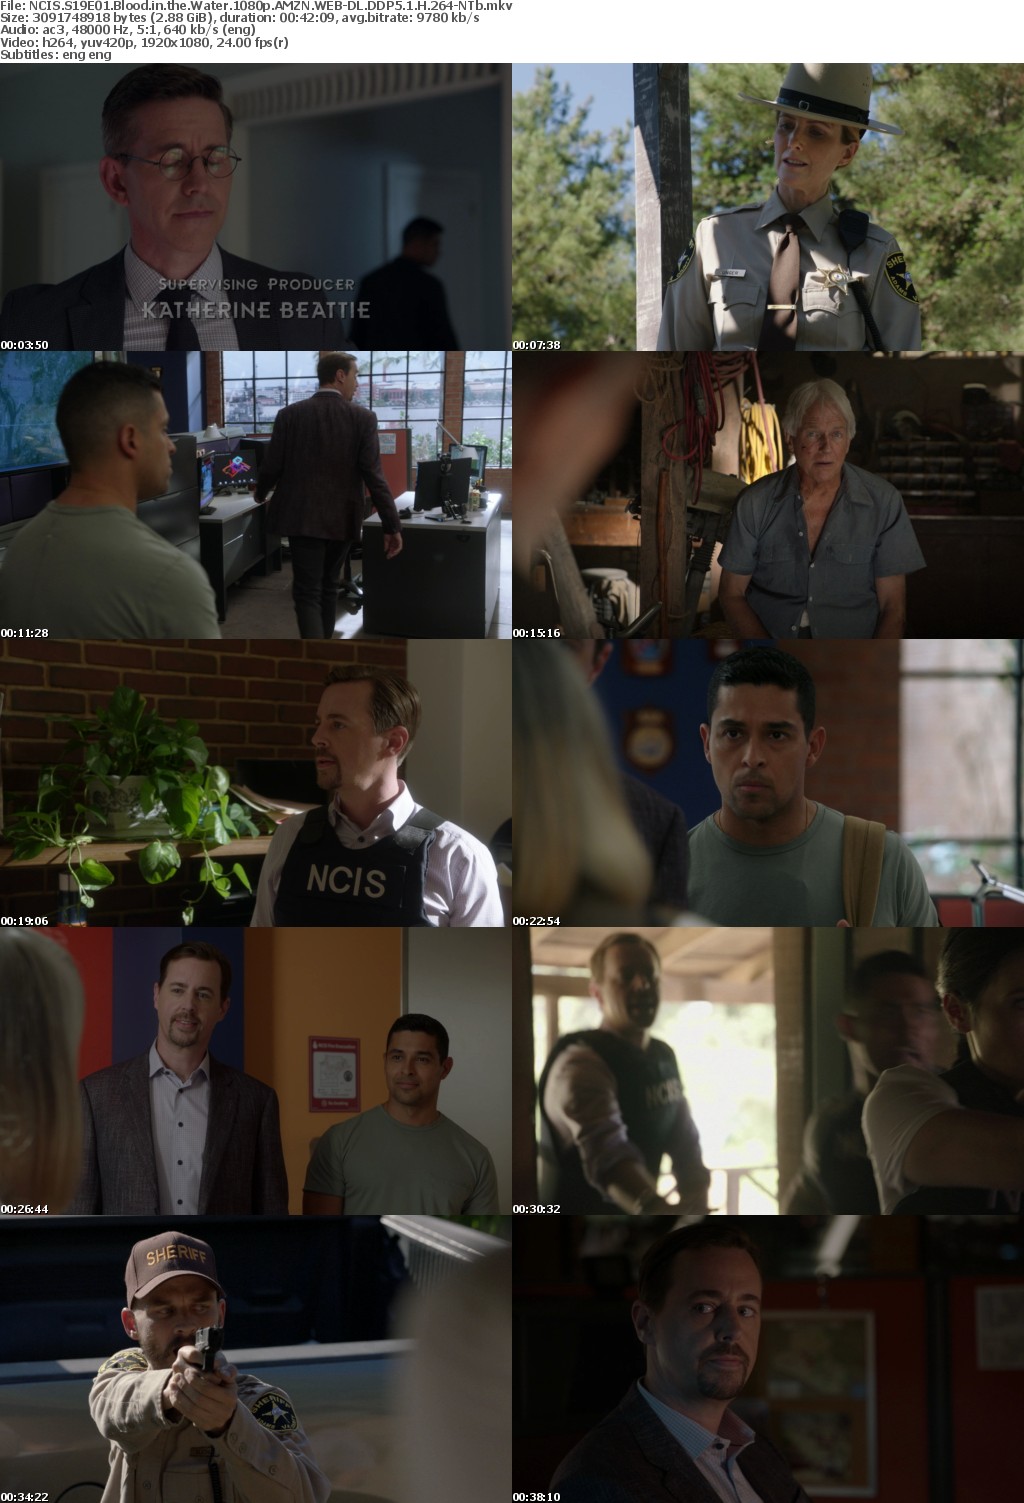 NCIS S19E01 Blood in the Water 1080p AMZN WEBRip DDP5 1 x264-NTb